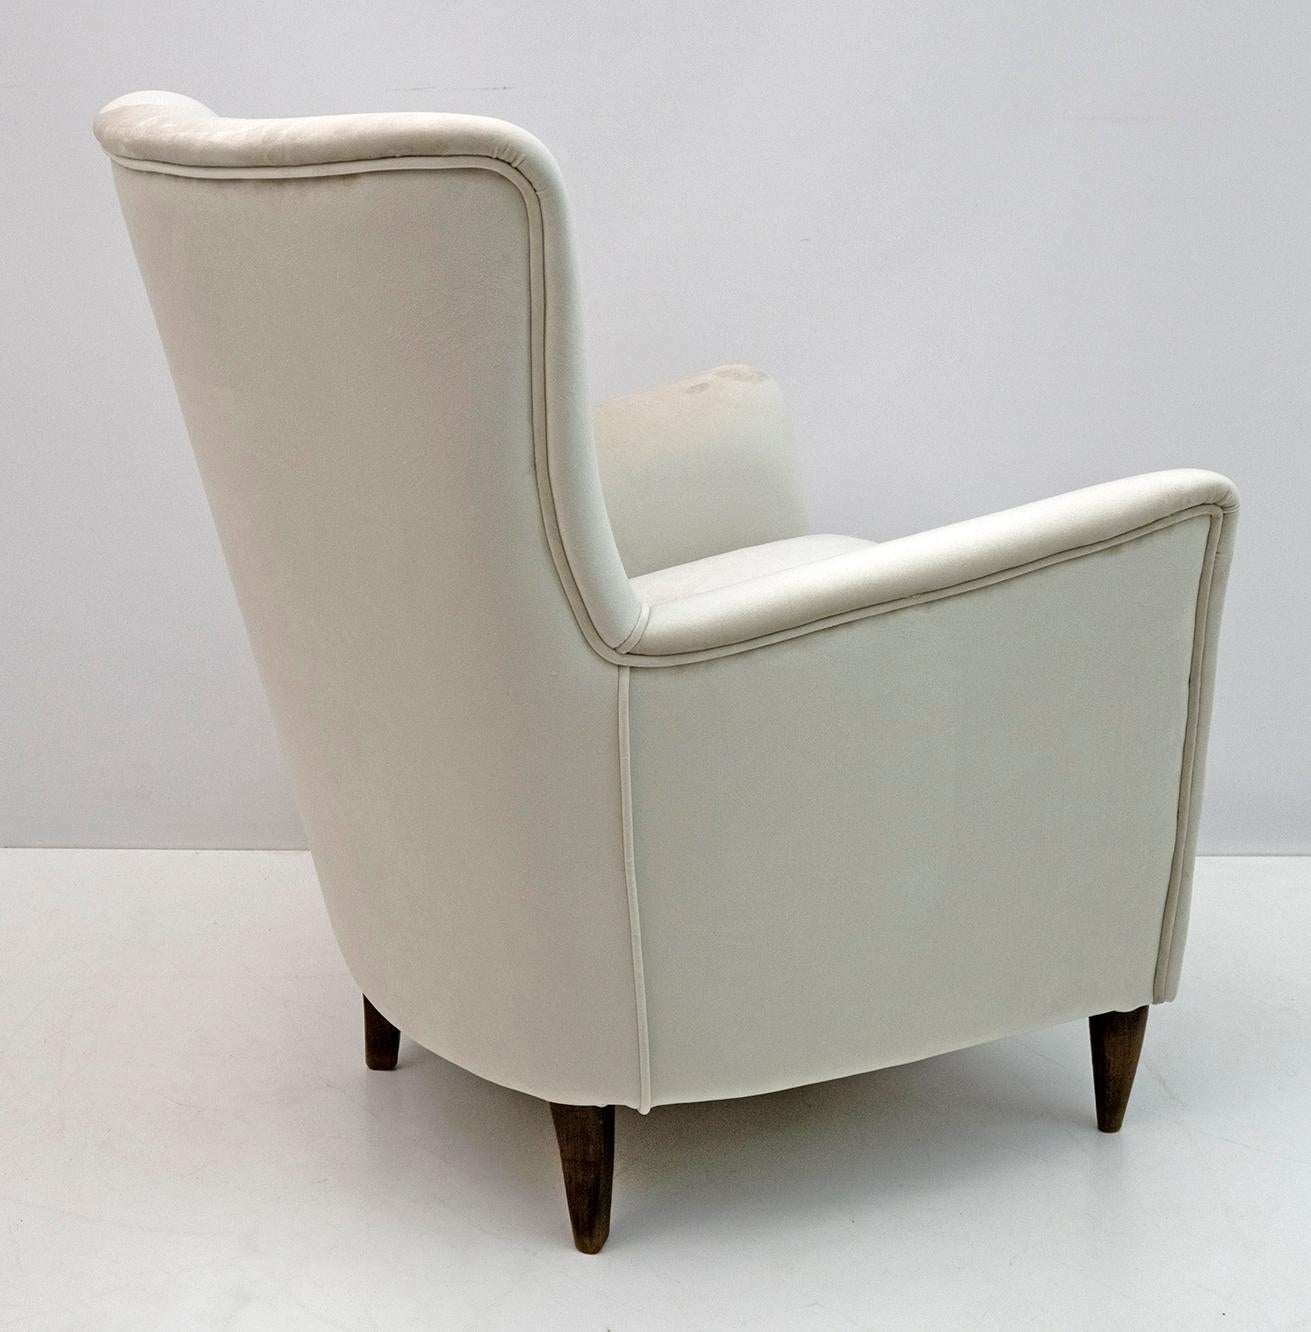 Mid-20th Century Attributed Gio Ponti Mid-Century Modern Italian Velvet Armchair for Isa, 1950s For Sale